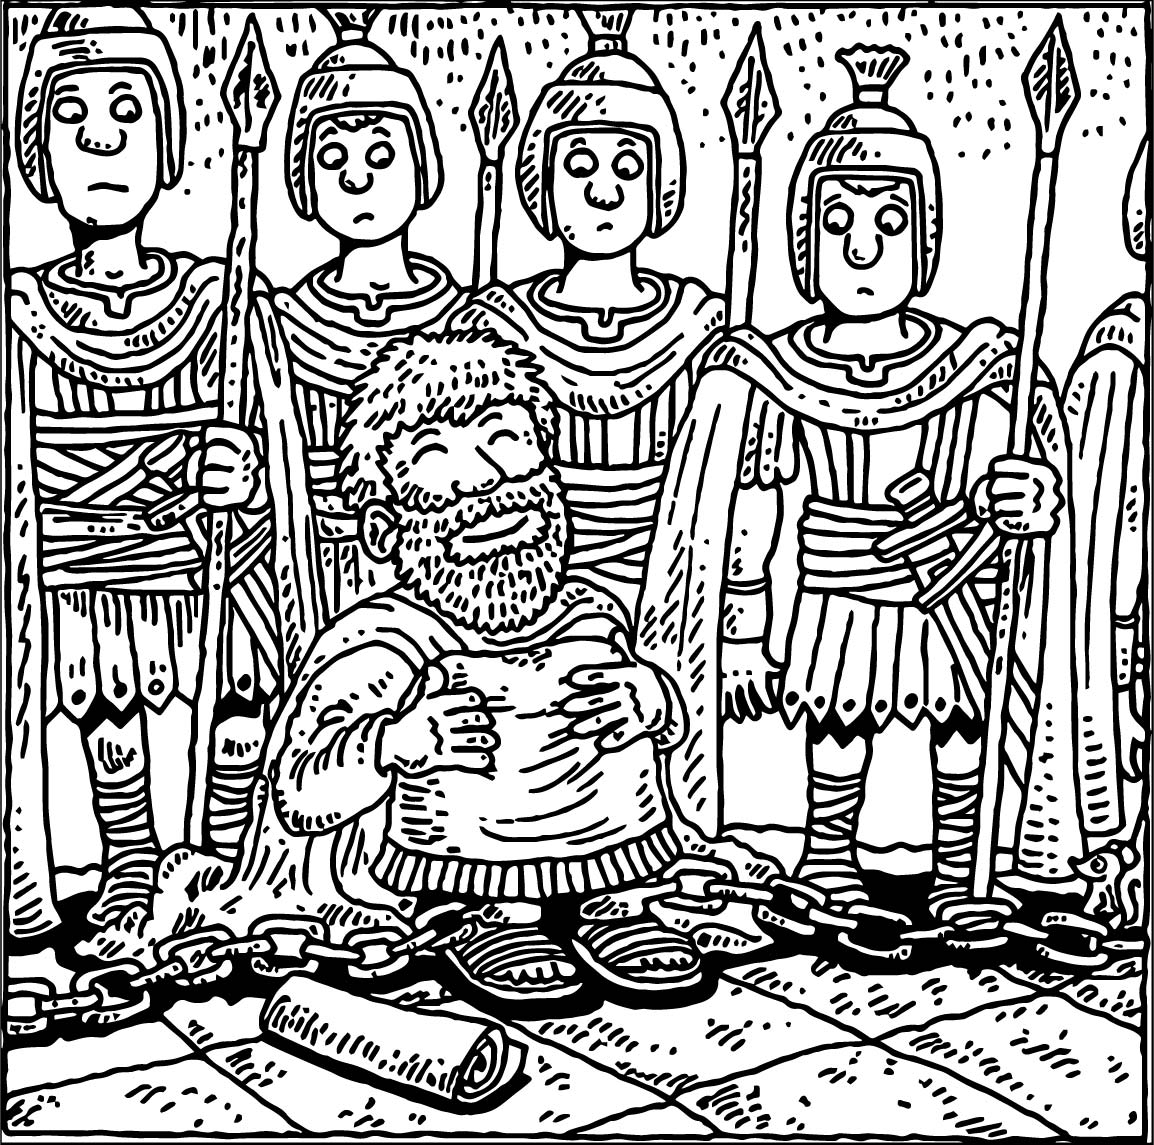 Barnabas Coloring Page Apostle Paul In Chain Coloring Page Wecoloringpage